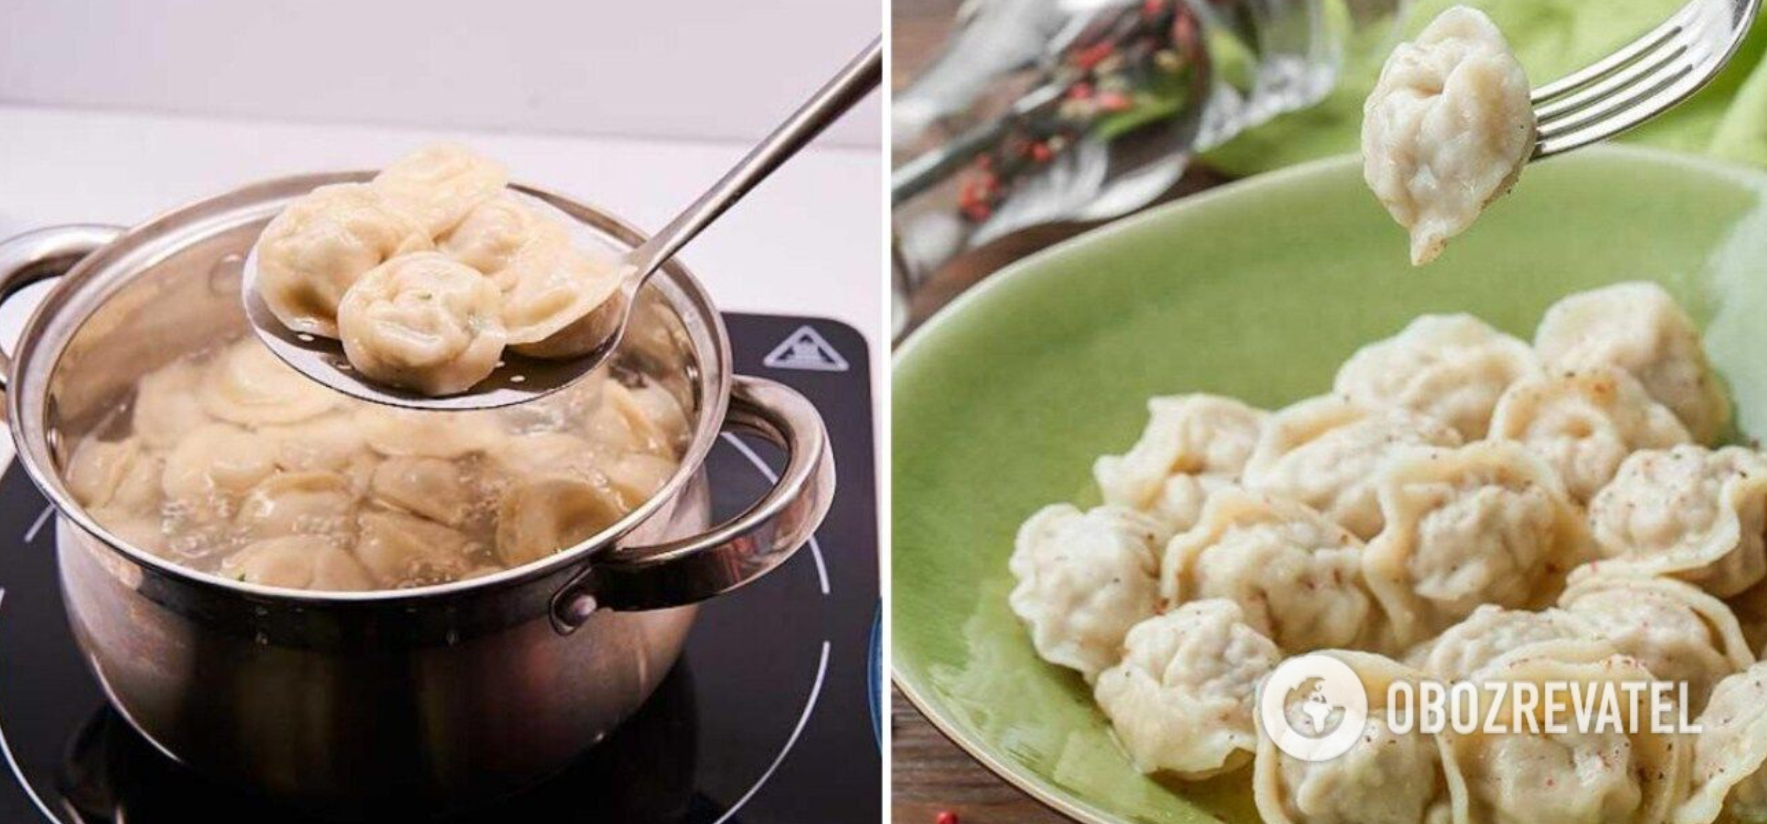 How to cook dumplings correctly and why they should not be thrown into boiling water